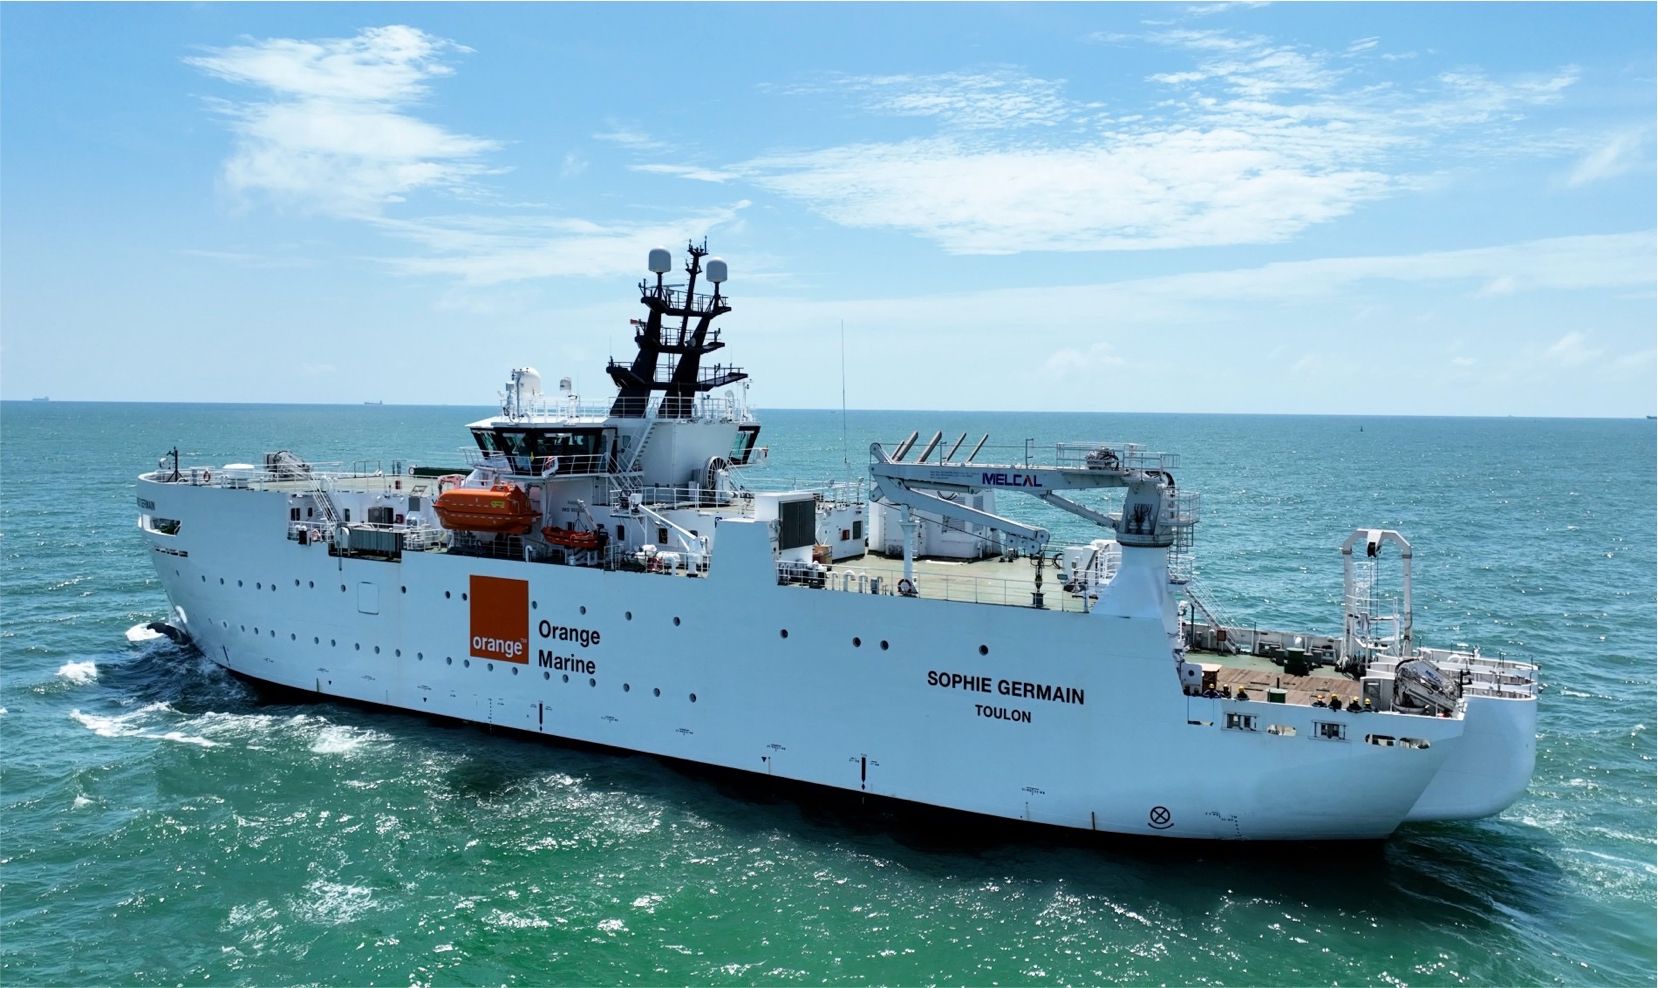 French Telecom Giant Takes Delivery of Offshore Wind Cable Laying Vessel